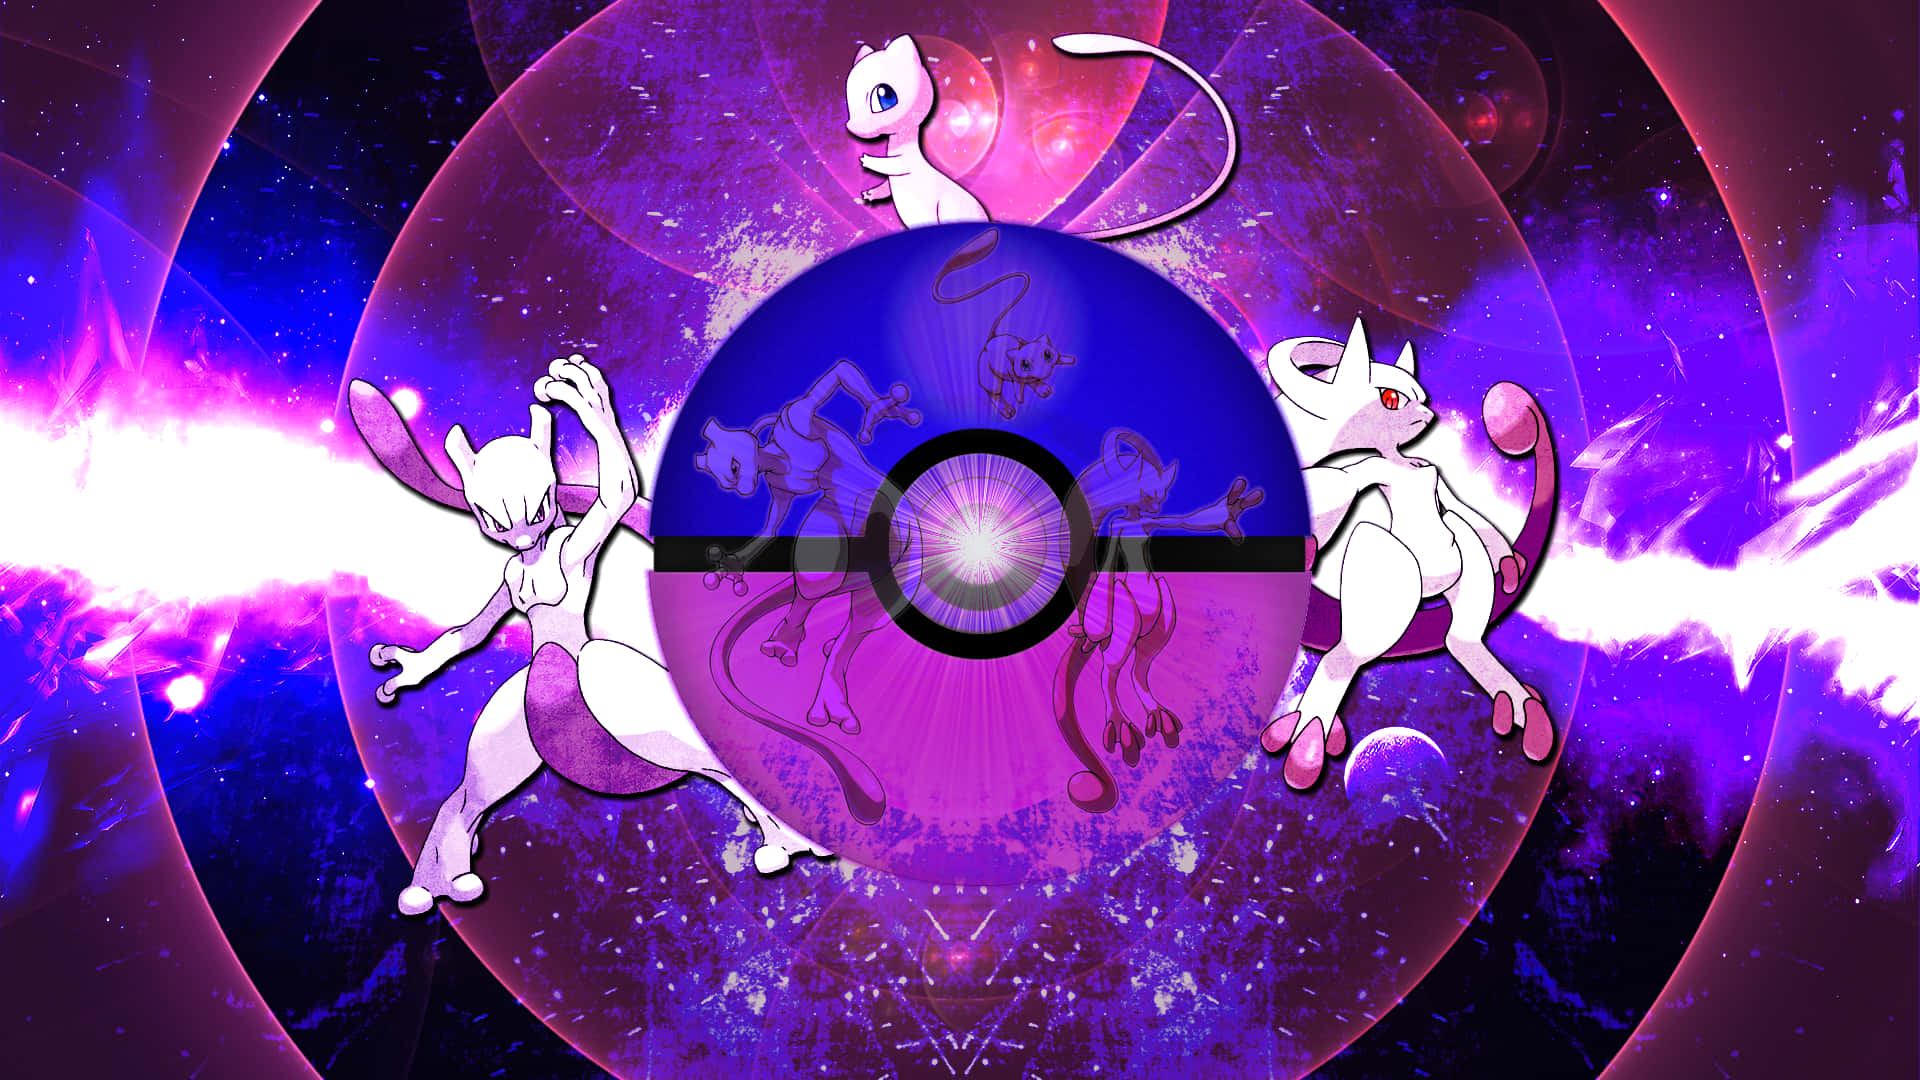 "Look out! It's the Mythical Pokemon Mew!" Wallpaper